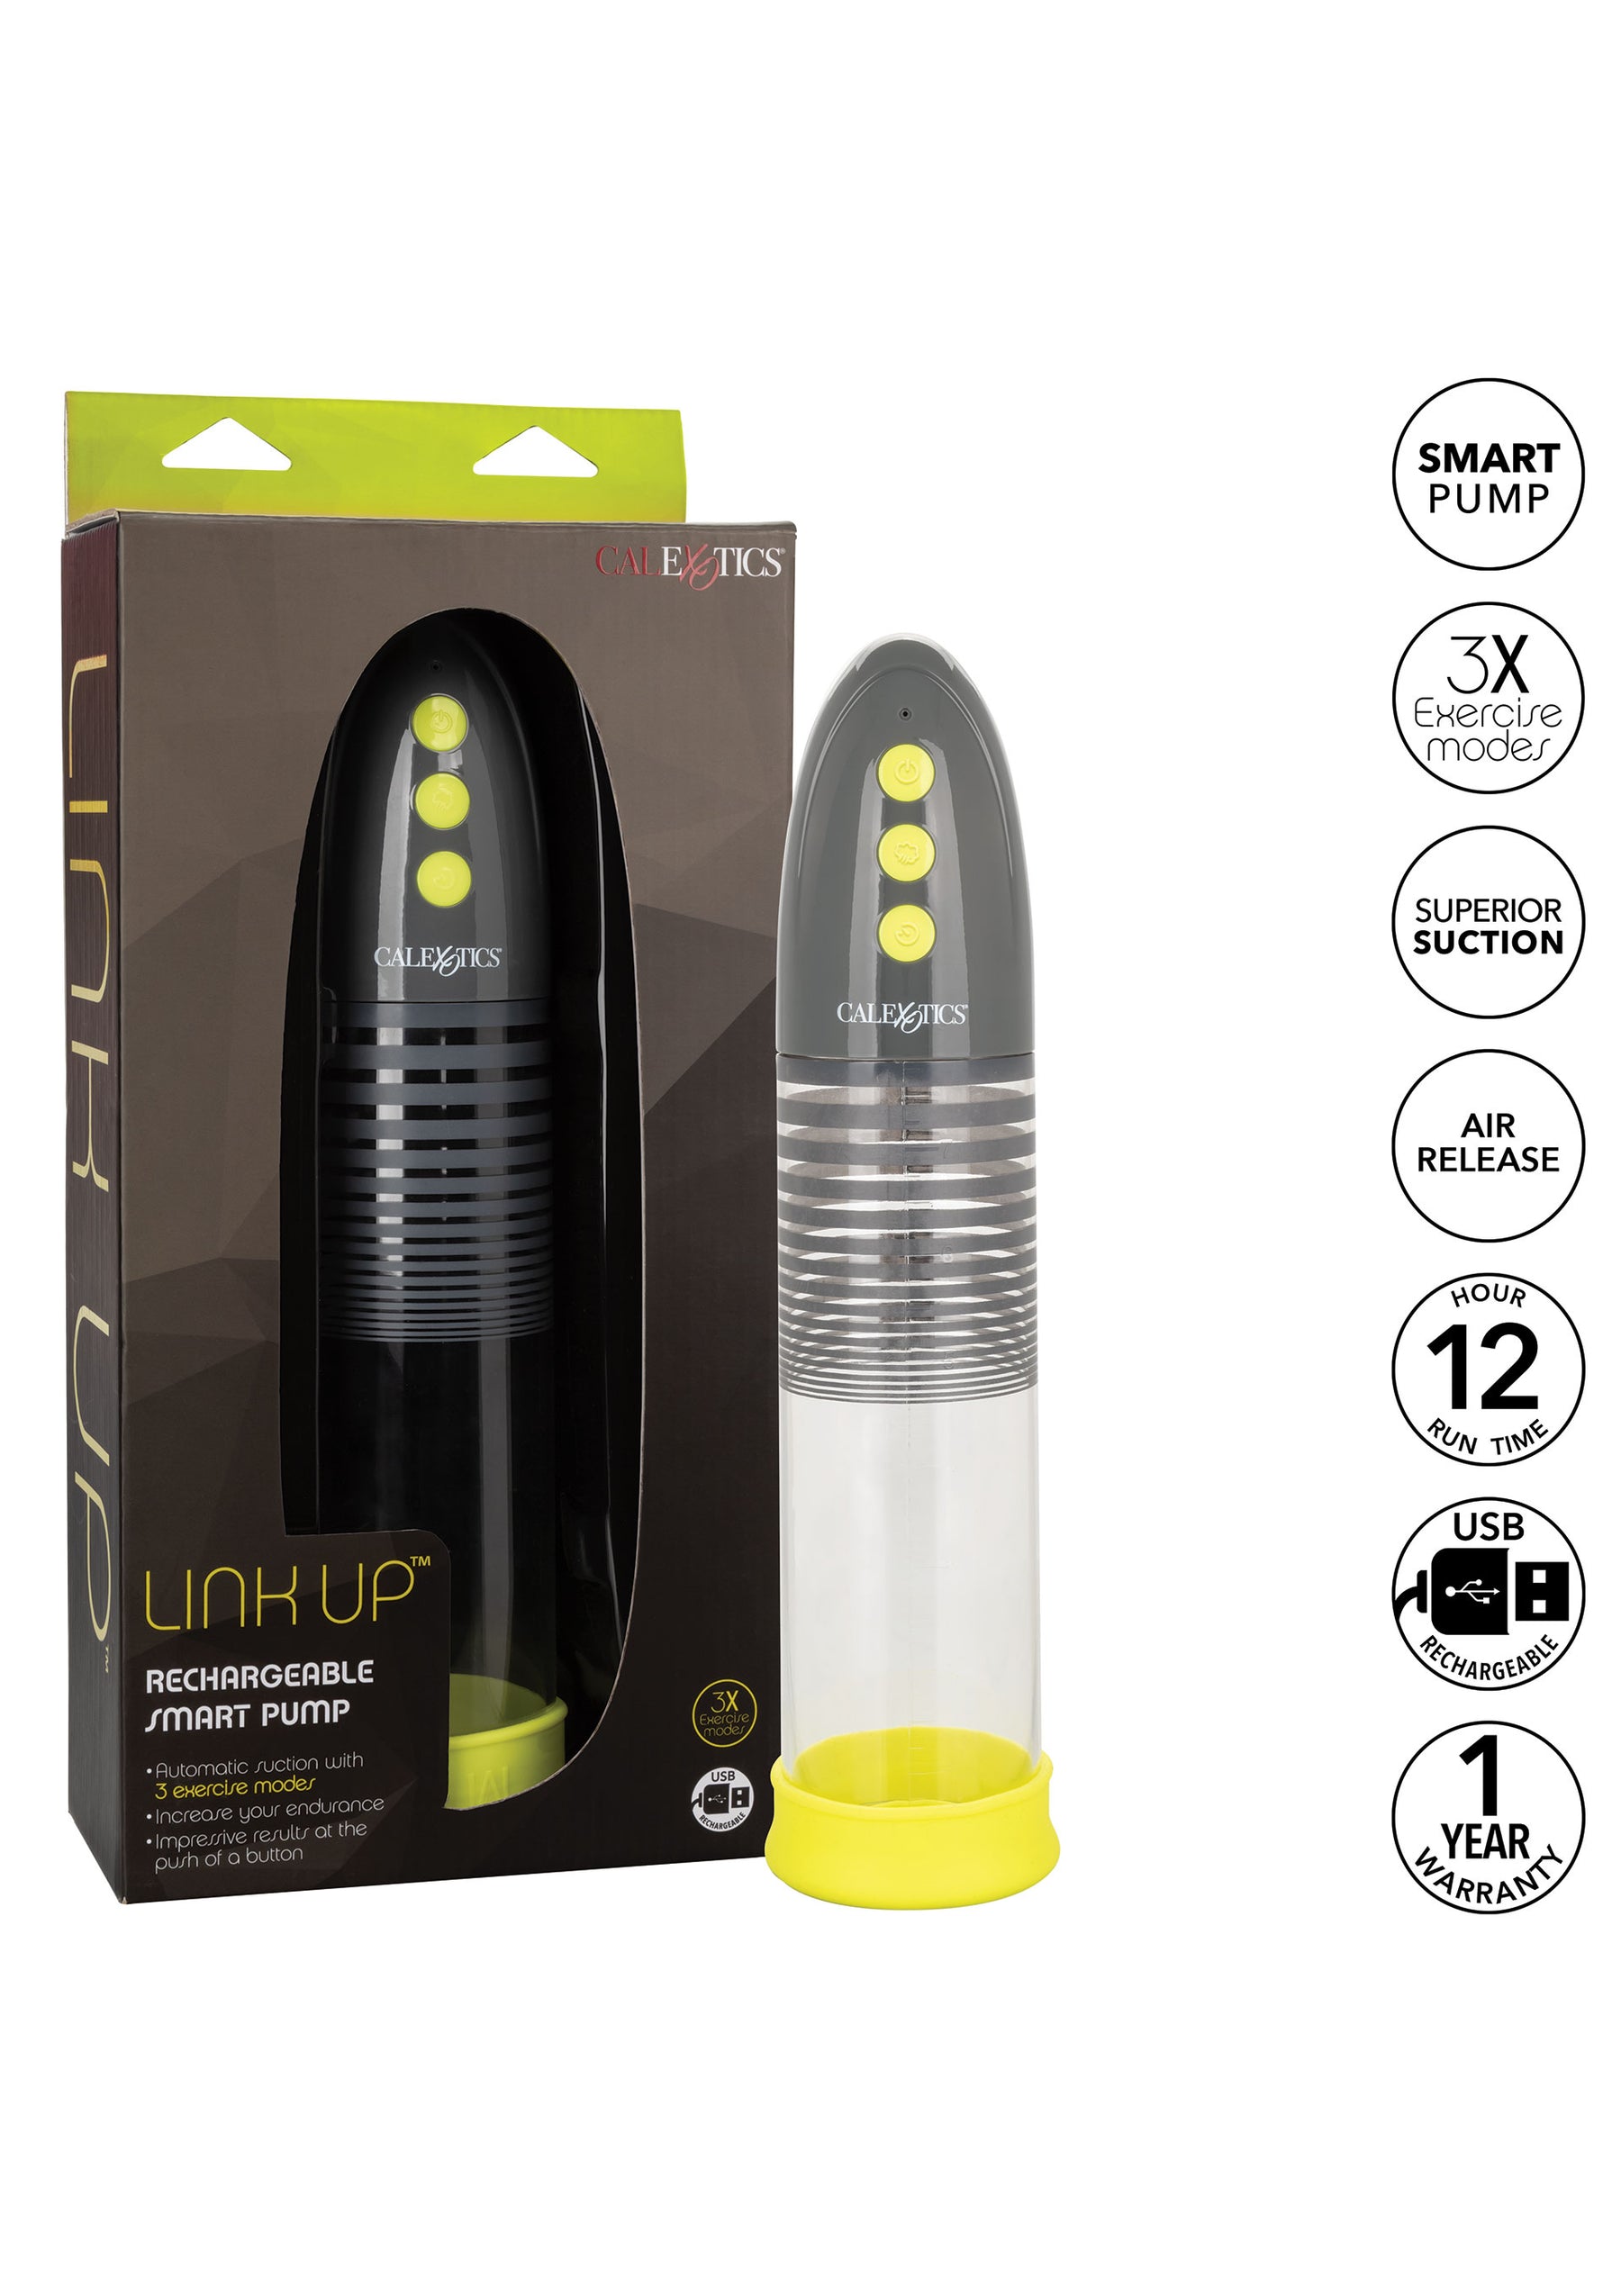 Link Up Rechargeable Pump